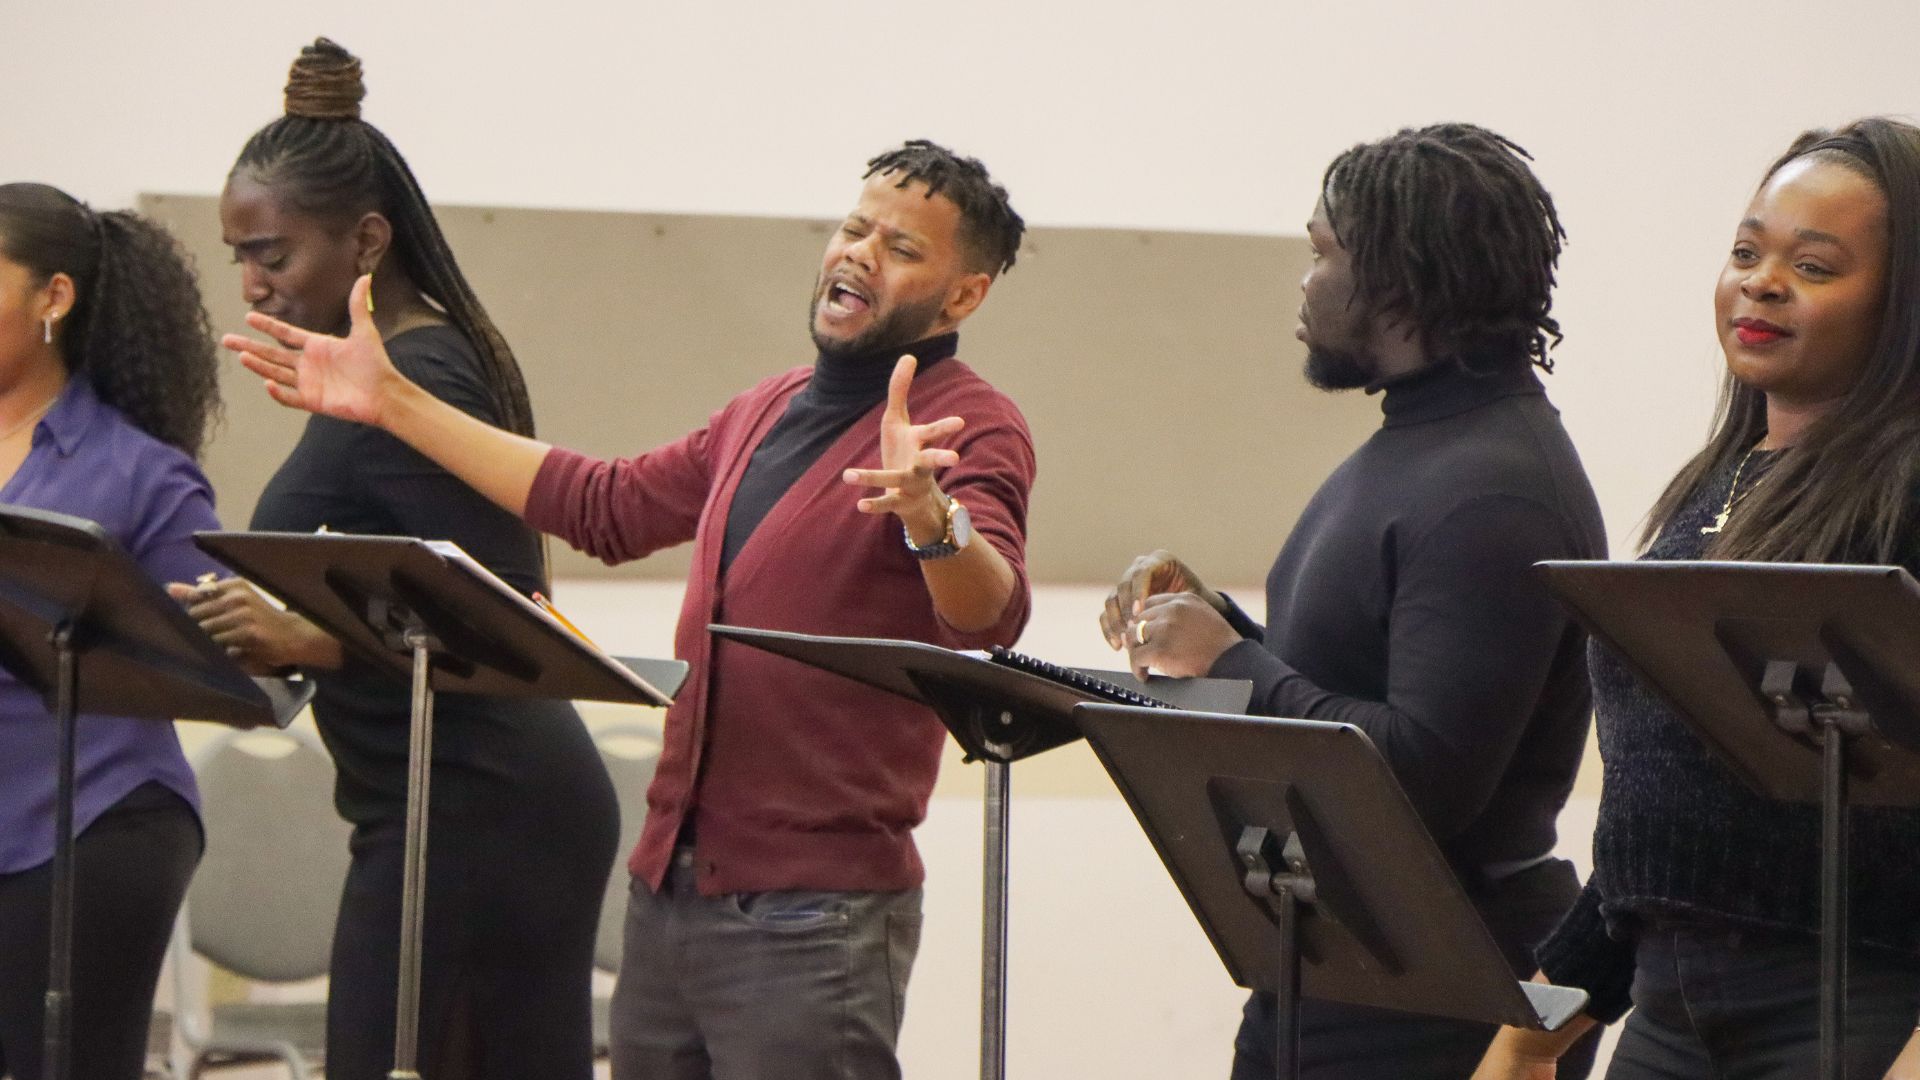 The New Works Collective, an initiative by Opera Theatre of Saint Louis, workshops three new operas.